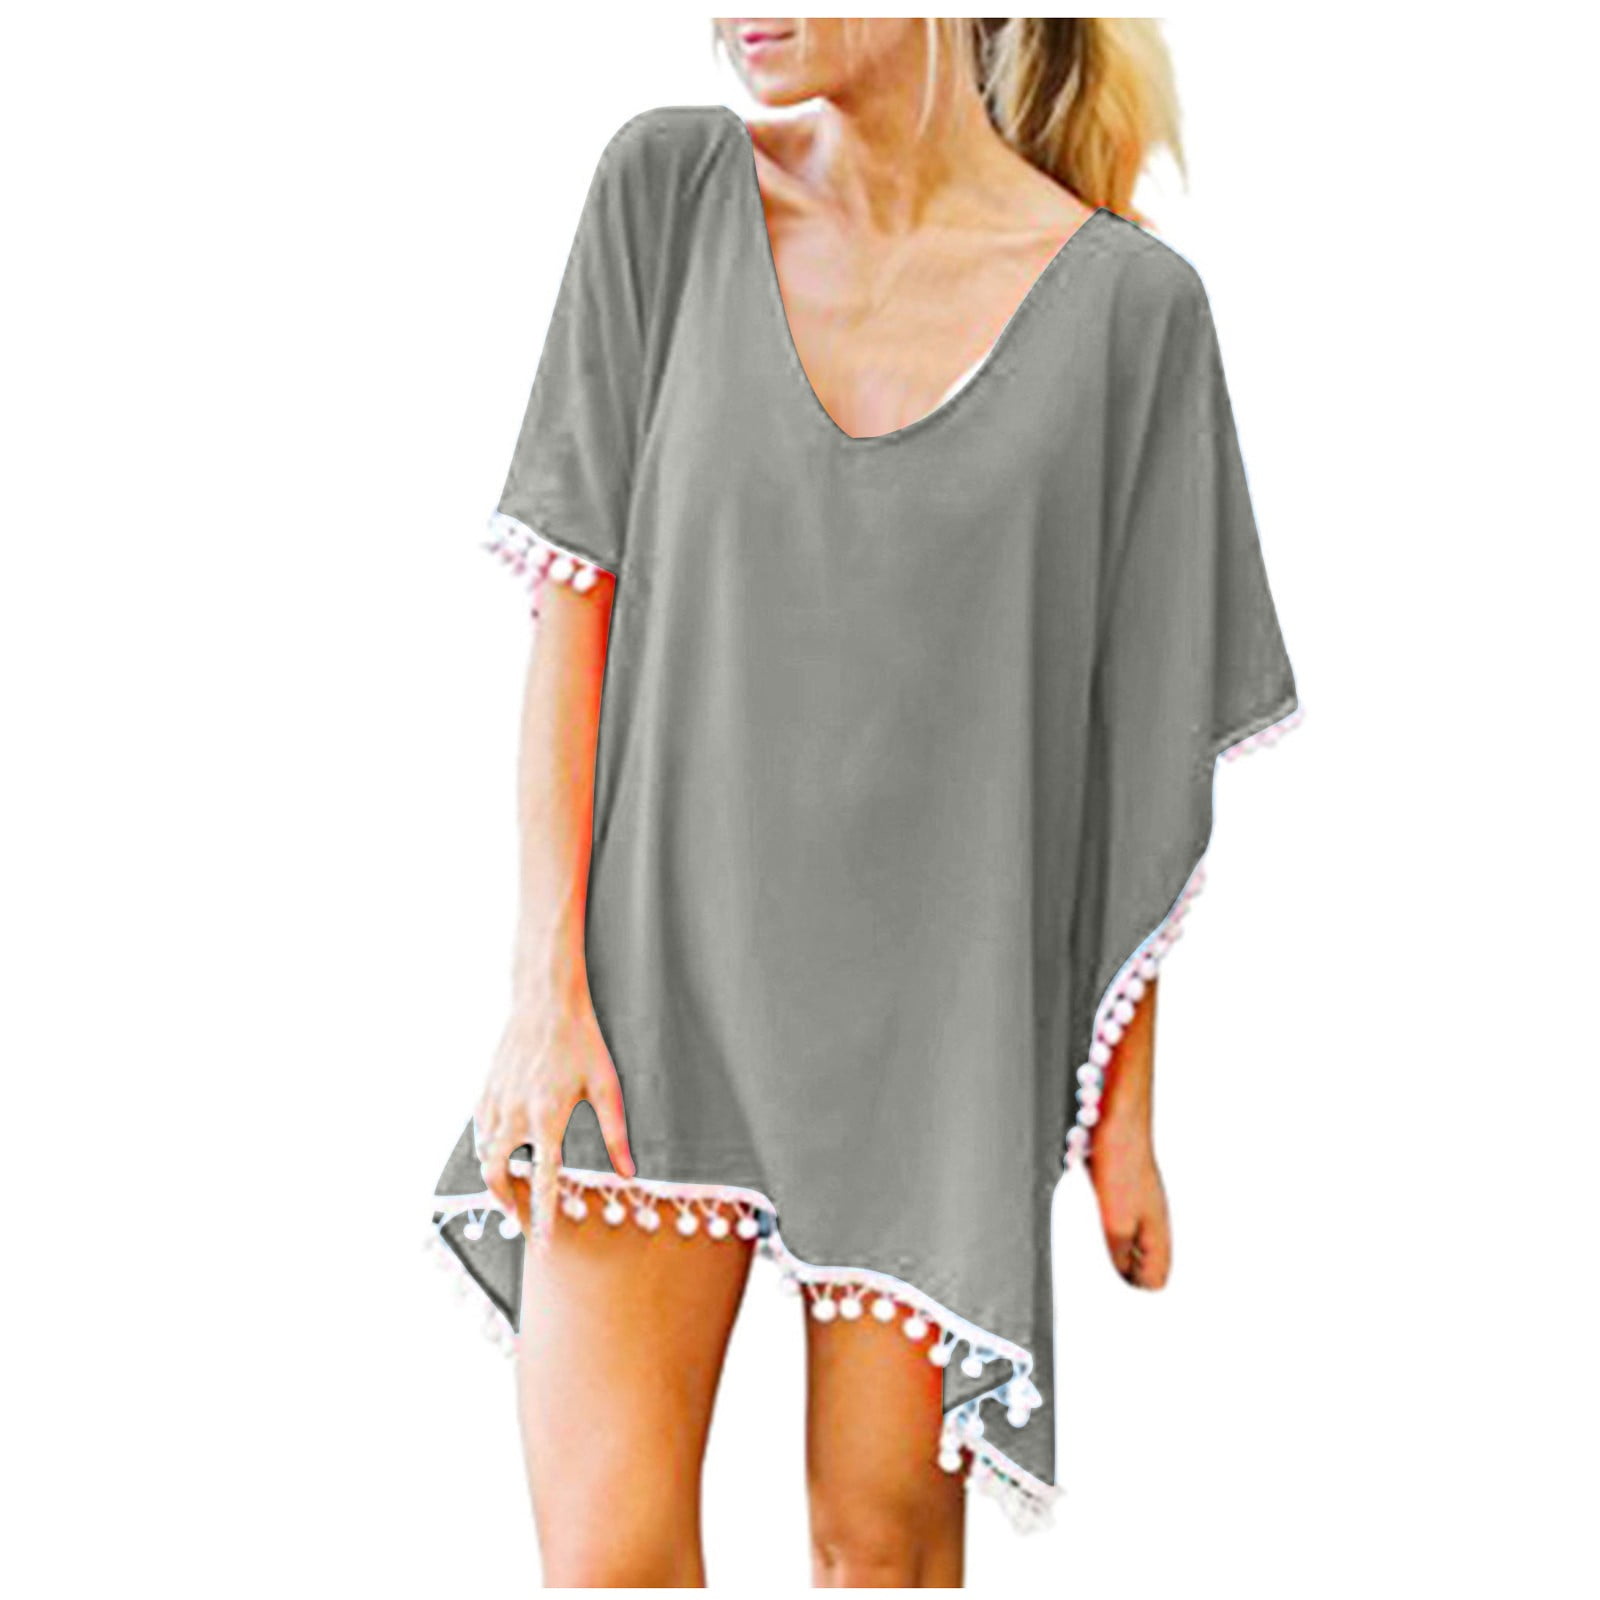 Ladies kaftan cover up Beach Pool wear with back strap details and pom poms 